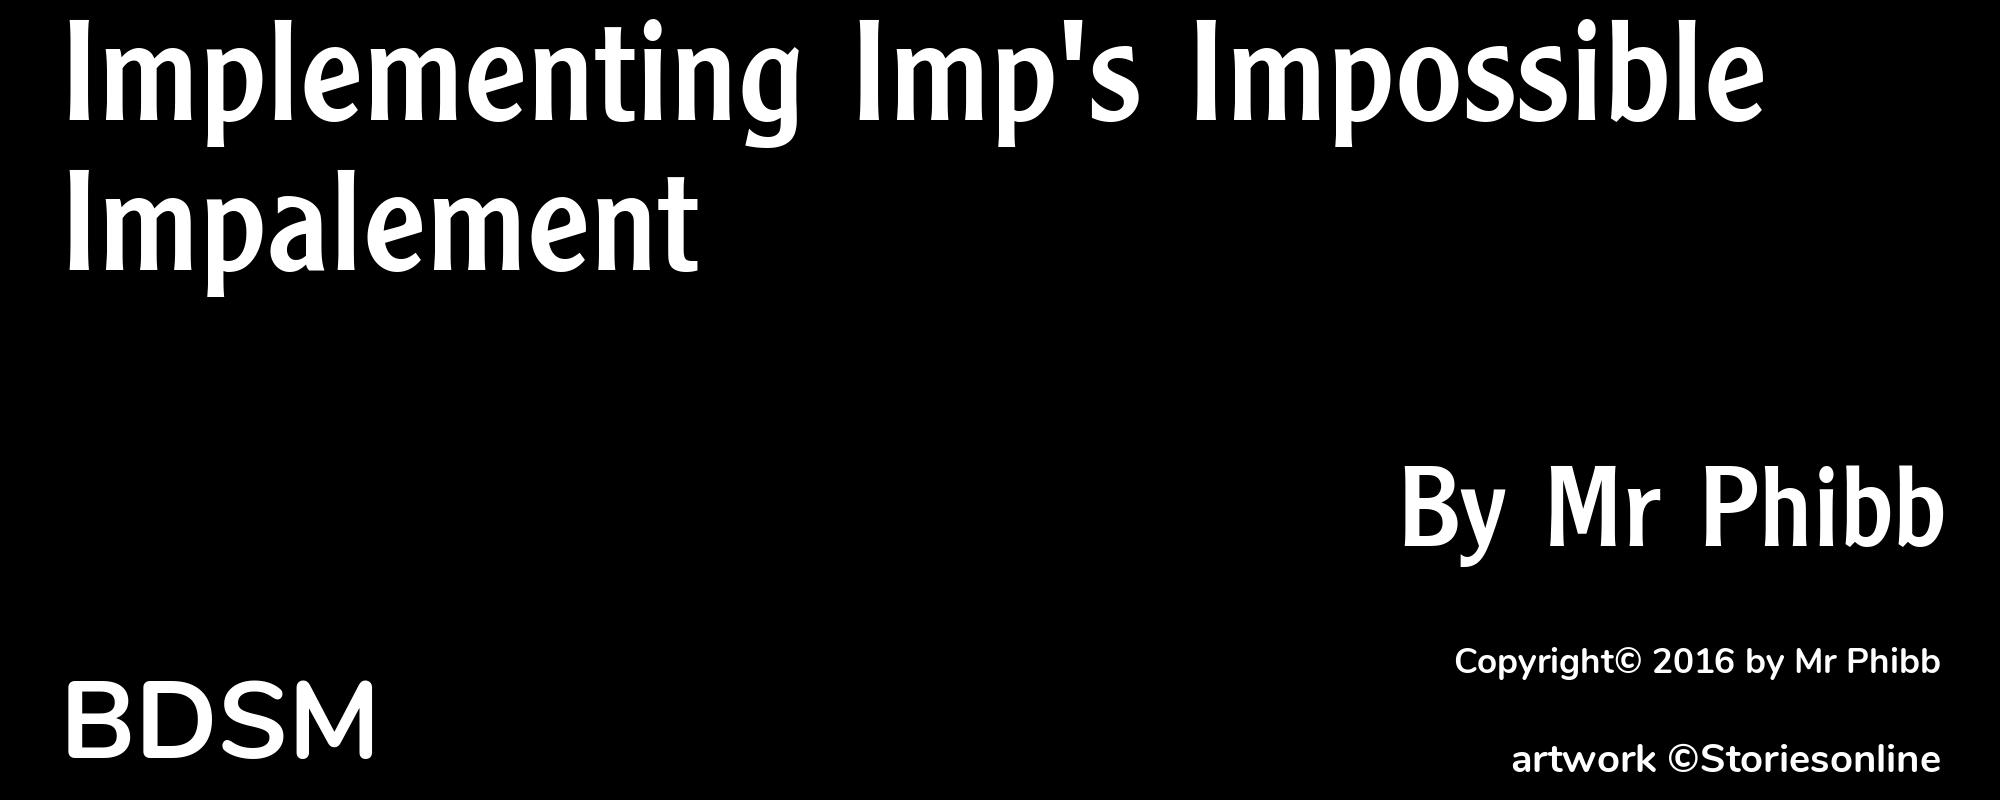 Implementing Imp's Impossible Impalement - Cover